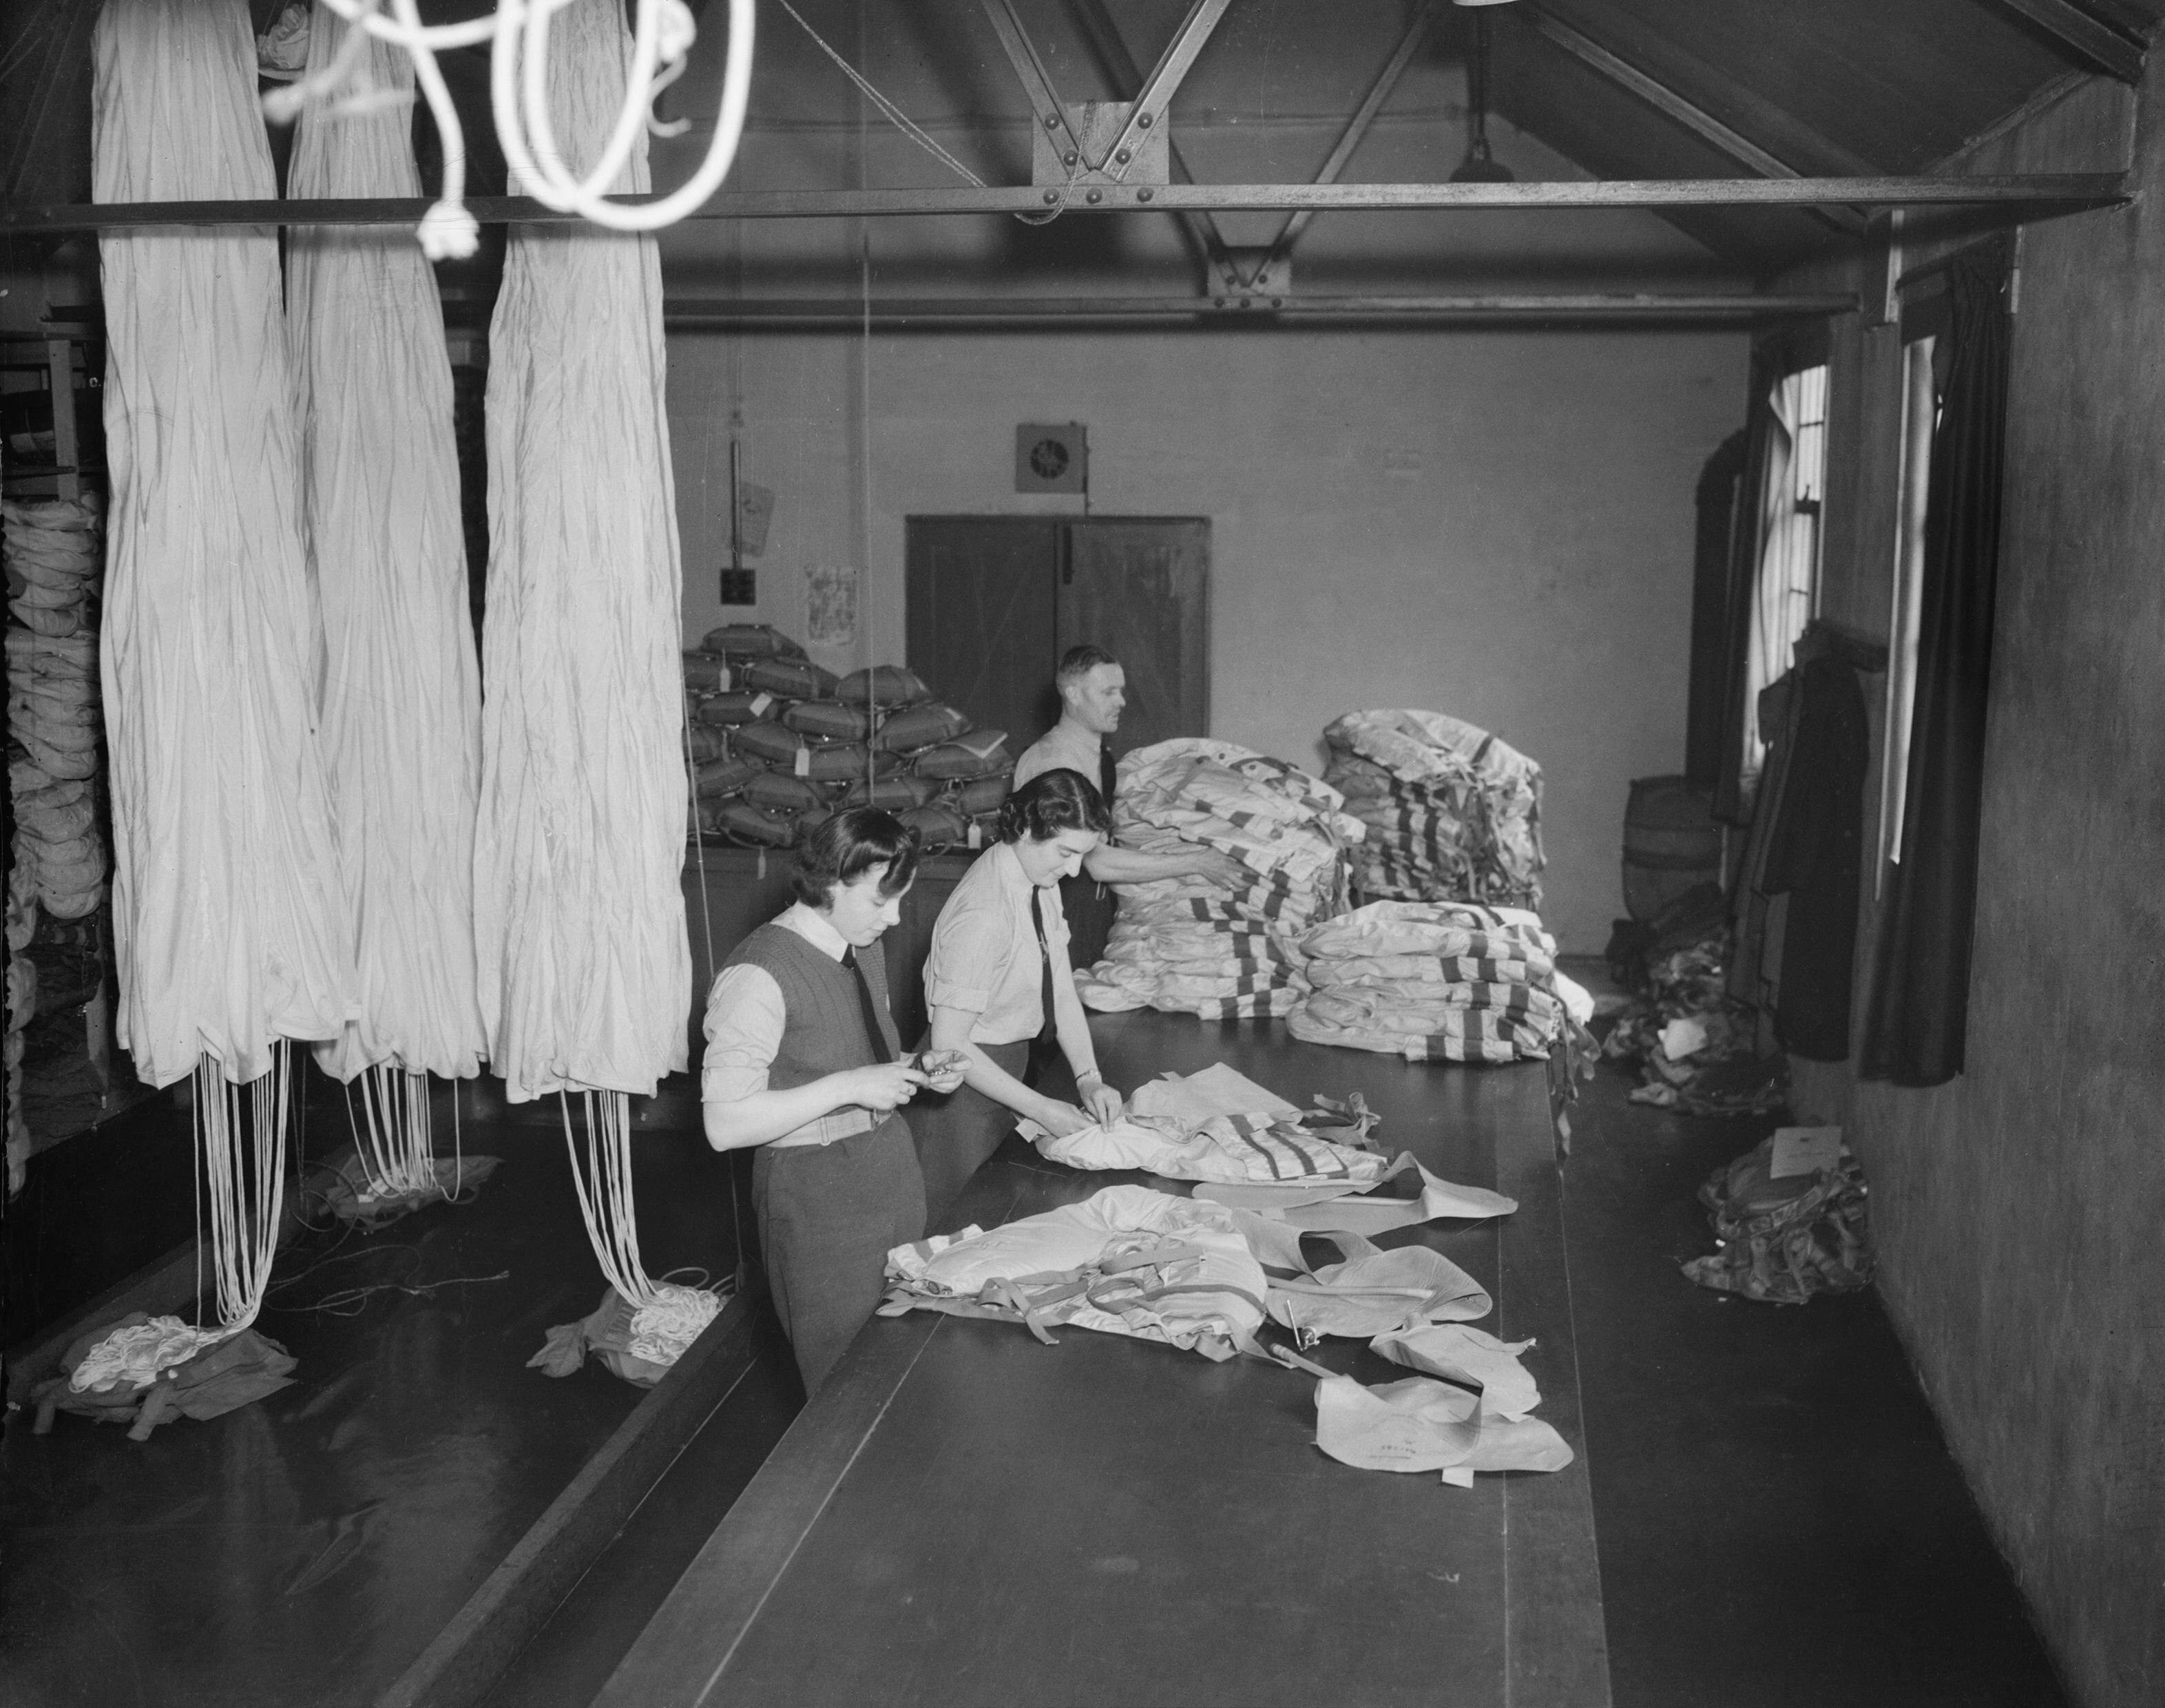 WAAF safety equipment assistants inspecting Mark I Life Jackets ('Mae Wests') in the parachute section at RAF Snaith, Yorkshire, England, United Kingdom, 1942-1945